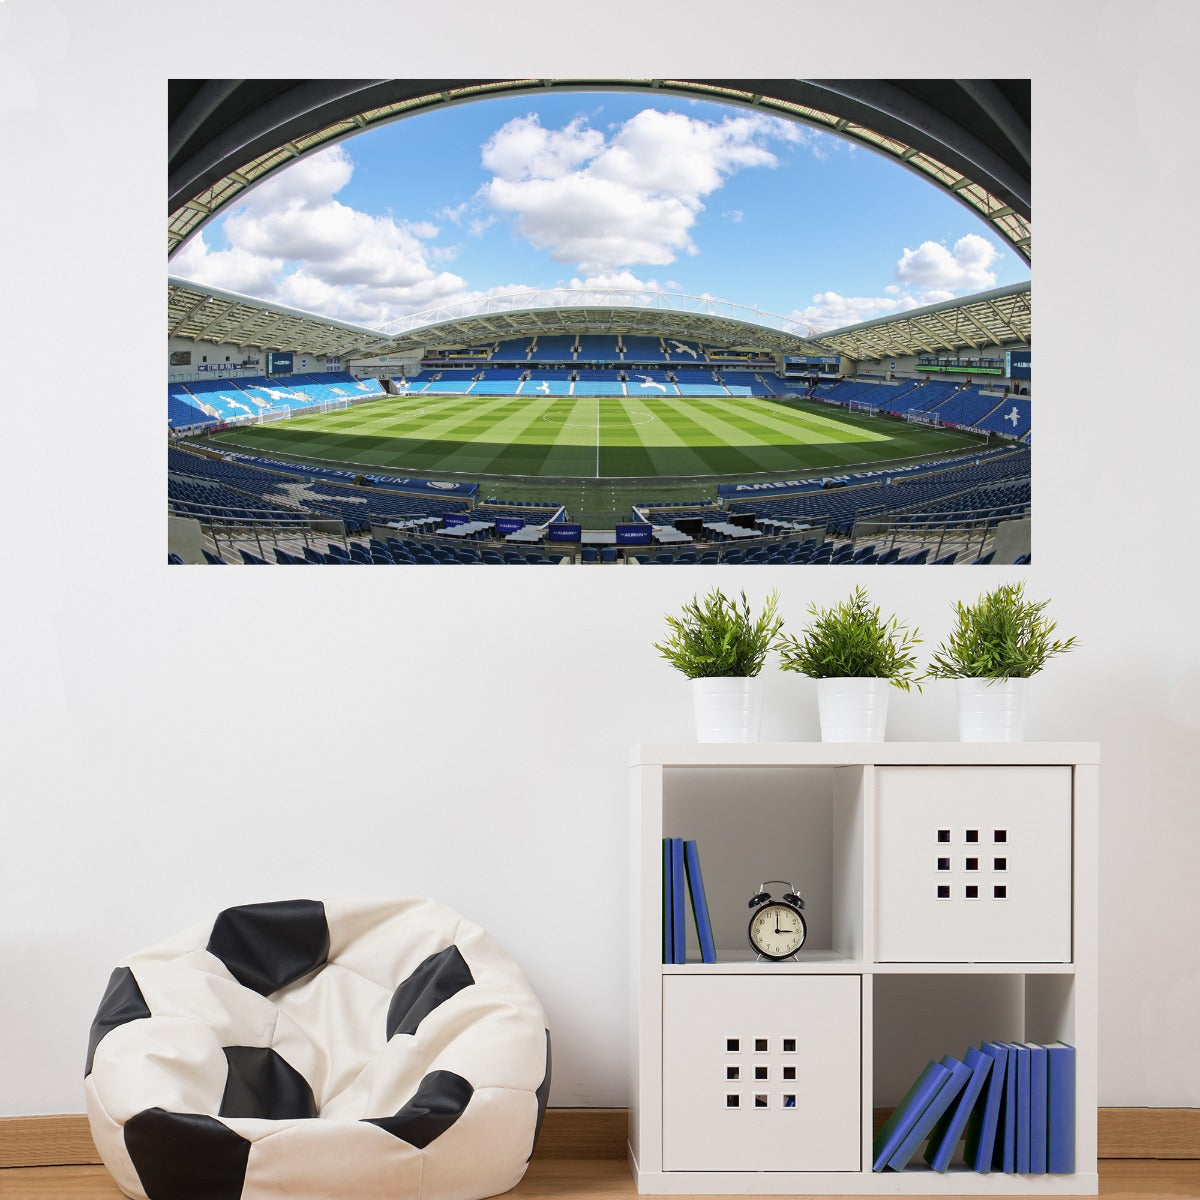 Brighton & Hove Albion FC - Day Time Stadium Wall Sticker + BHAFC Decal Set